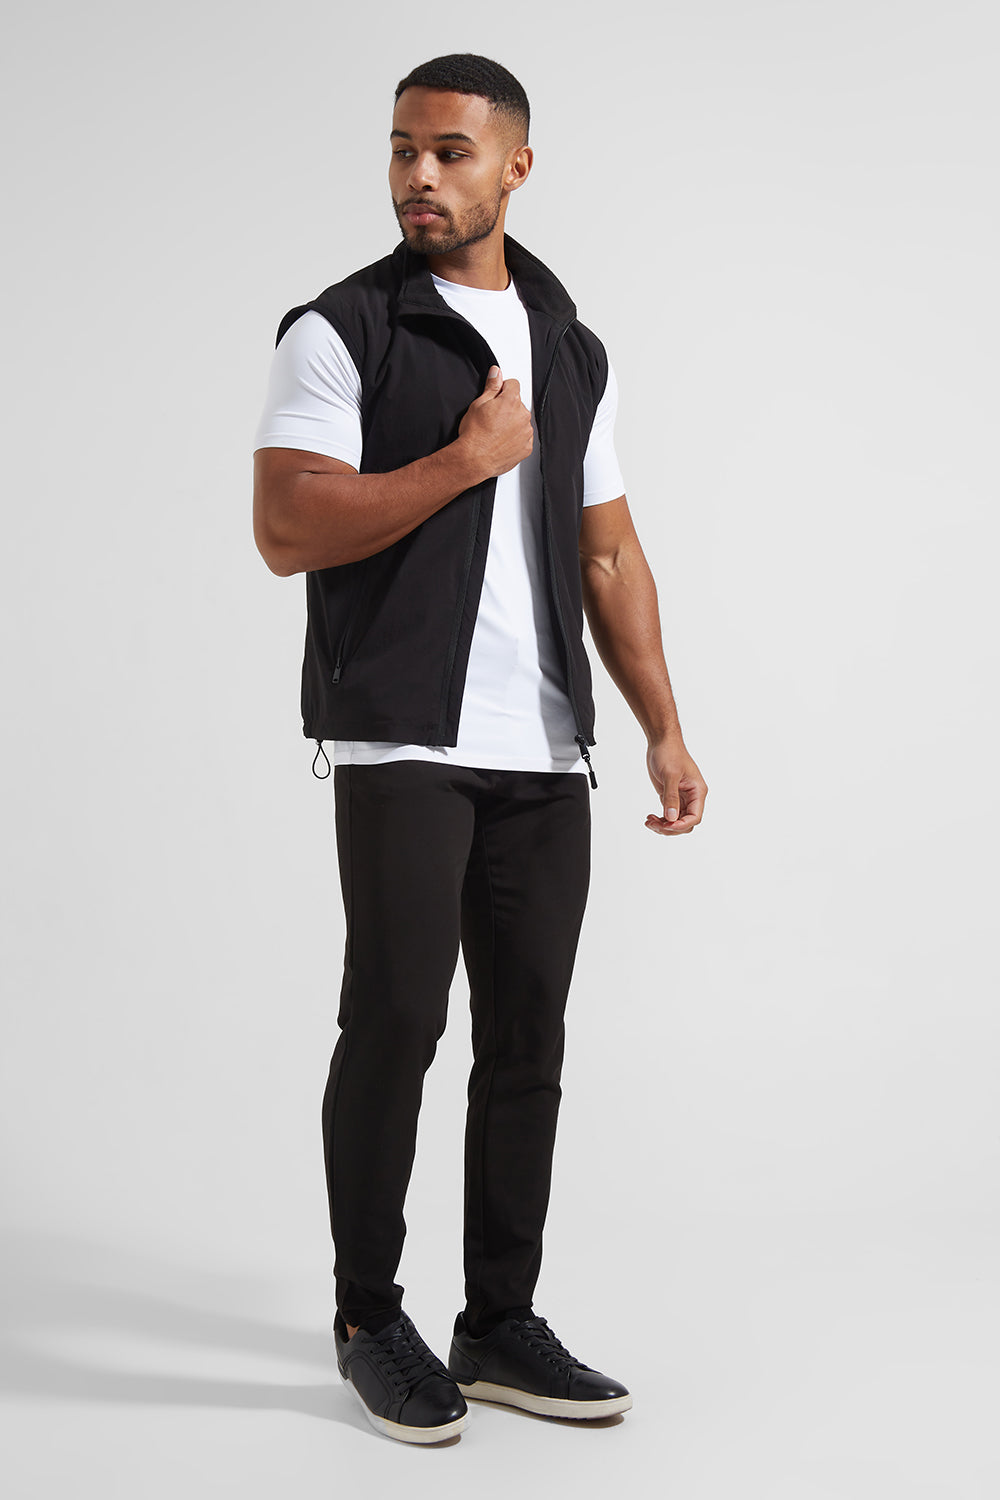 Performance Gilet in Black - TAILORED ATHLETE - ROW